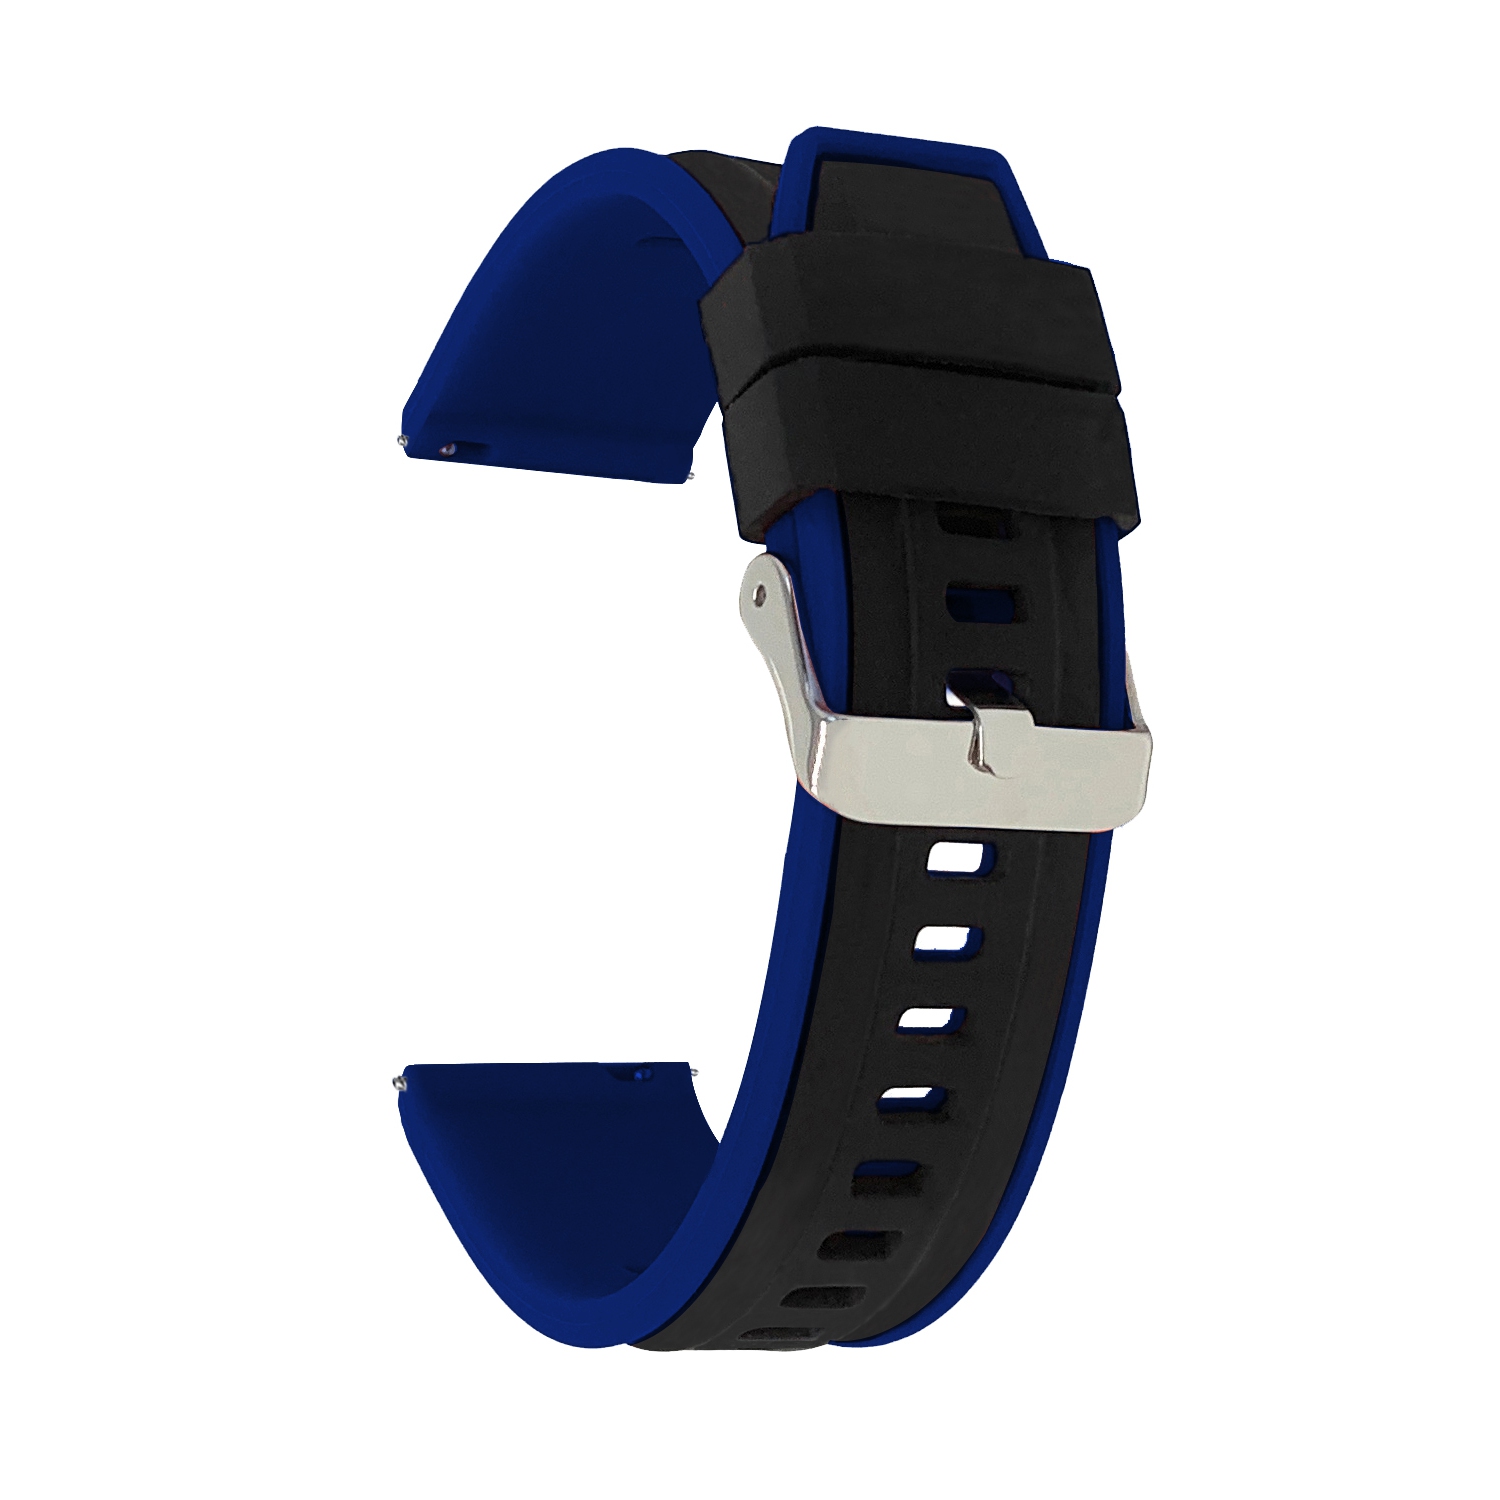 Bandini Quick Release Two-Tone Rubber Silicone Smart Watch Strap For Amazfit Bip, U, S, Lite, GTR 42mm, GTS - 20mm, Black / Blue / Silver Buckle